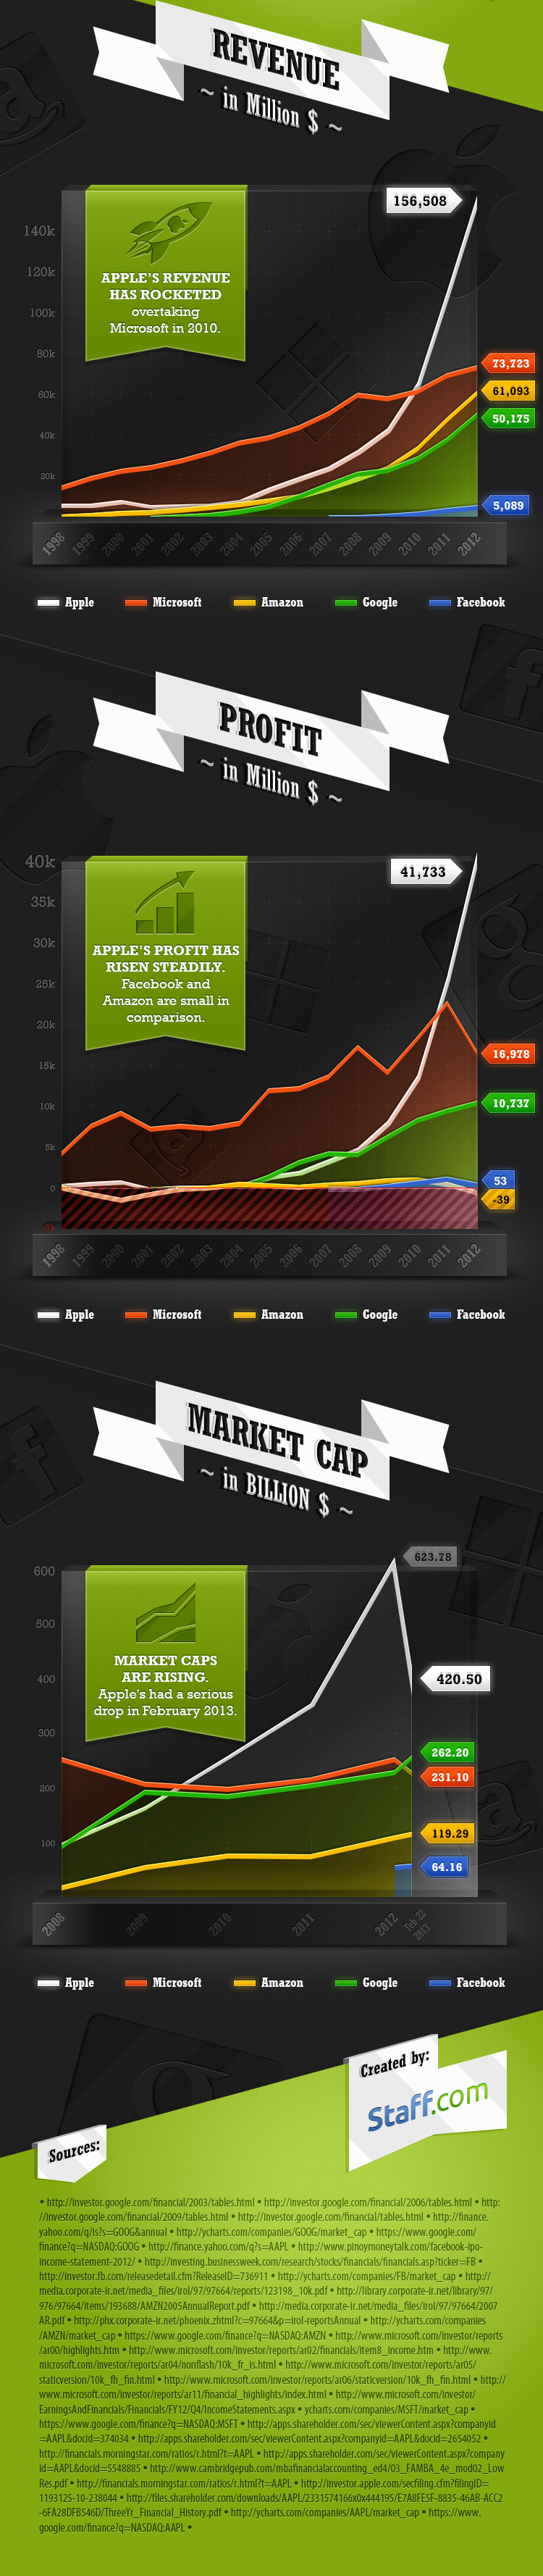 Revenues and Profits of Tech Giants Infographic Data